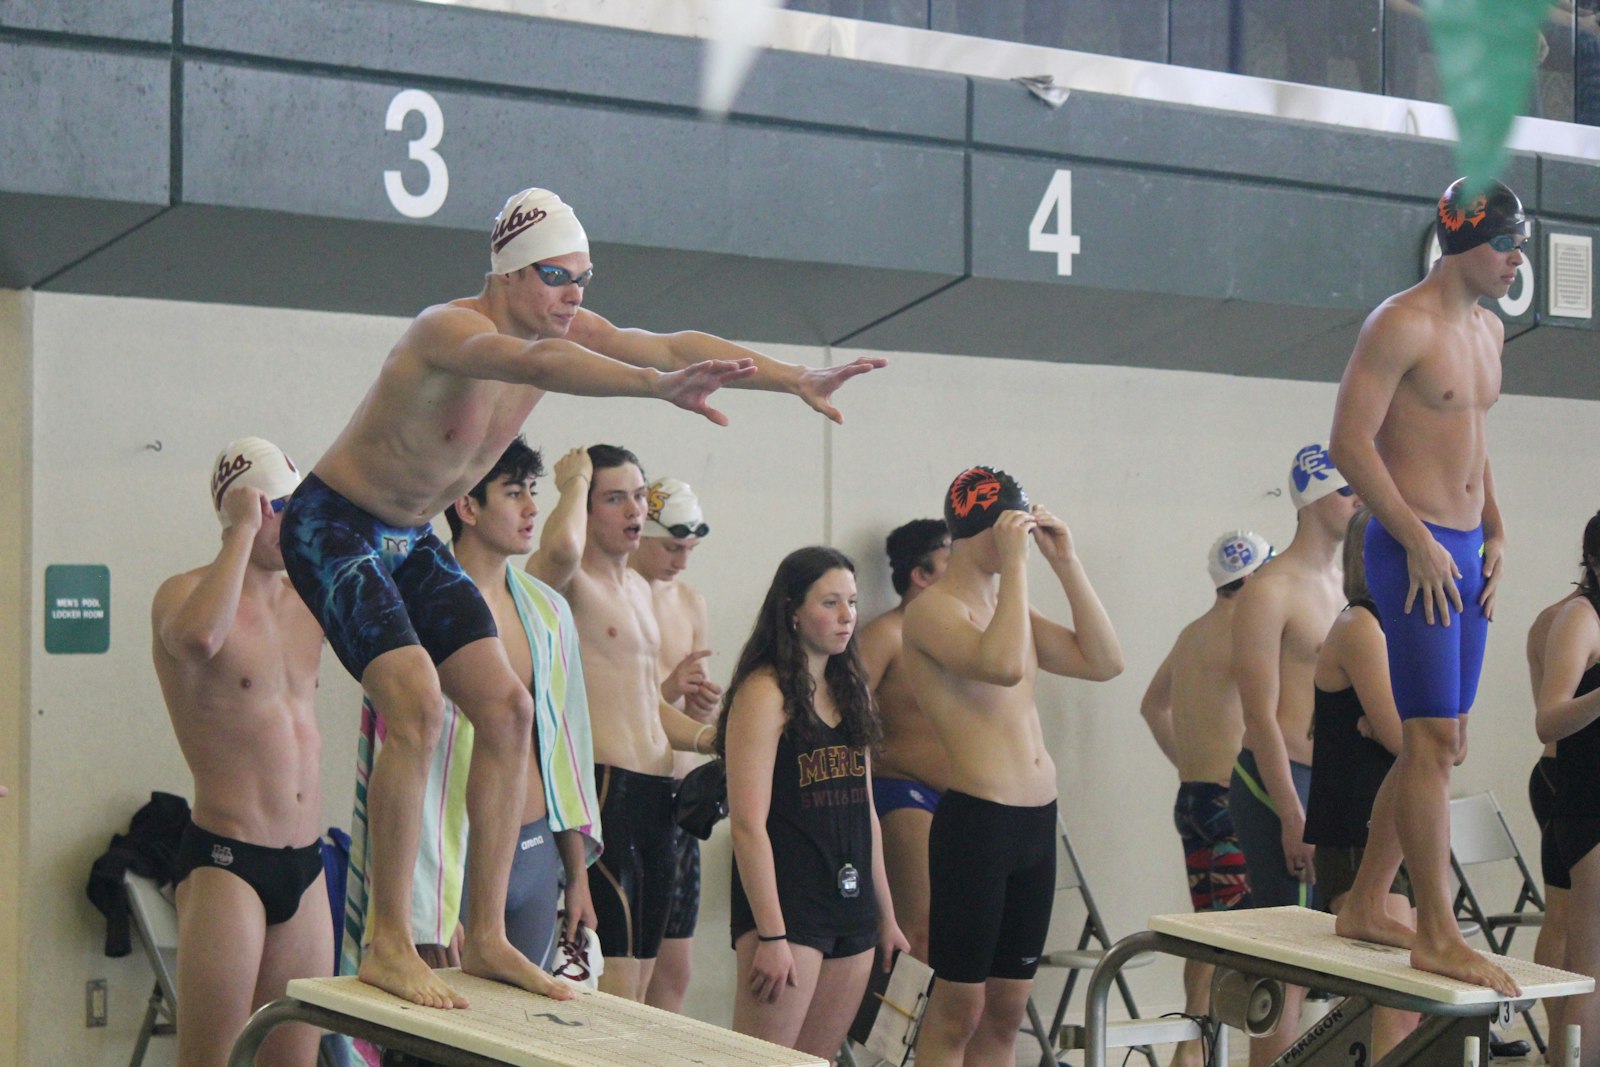 Drew Collins (left, on starting block) was a four-time winner for the Cubs. He placed first in the 200 and 100 freestyle races, and swam on the winning 200 and 400 free relays.